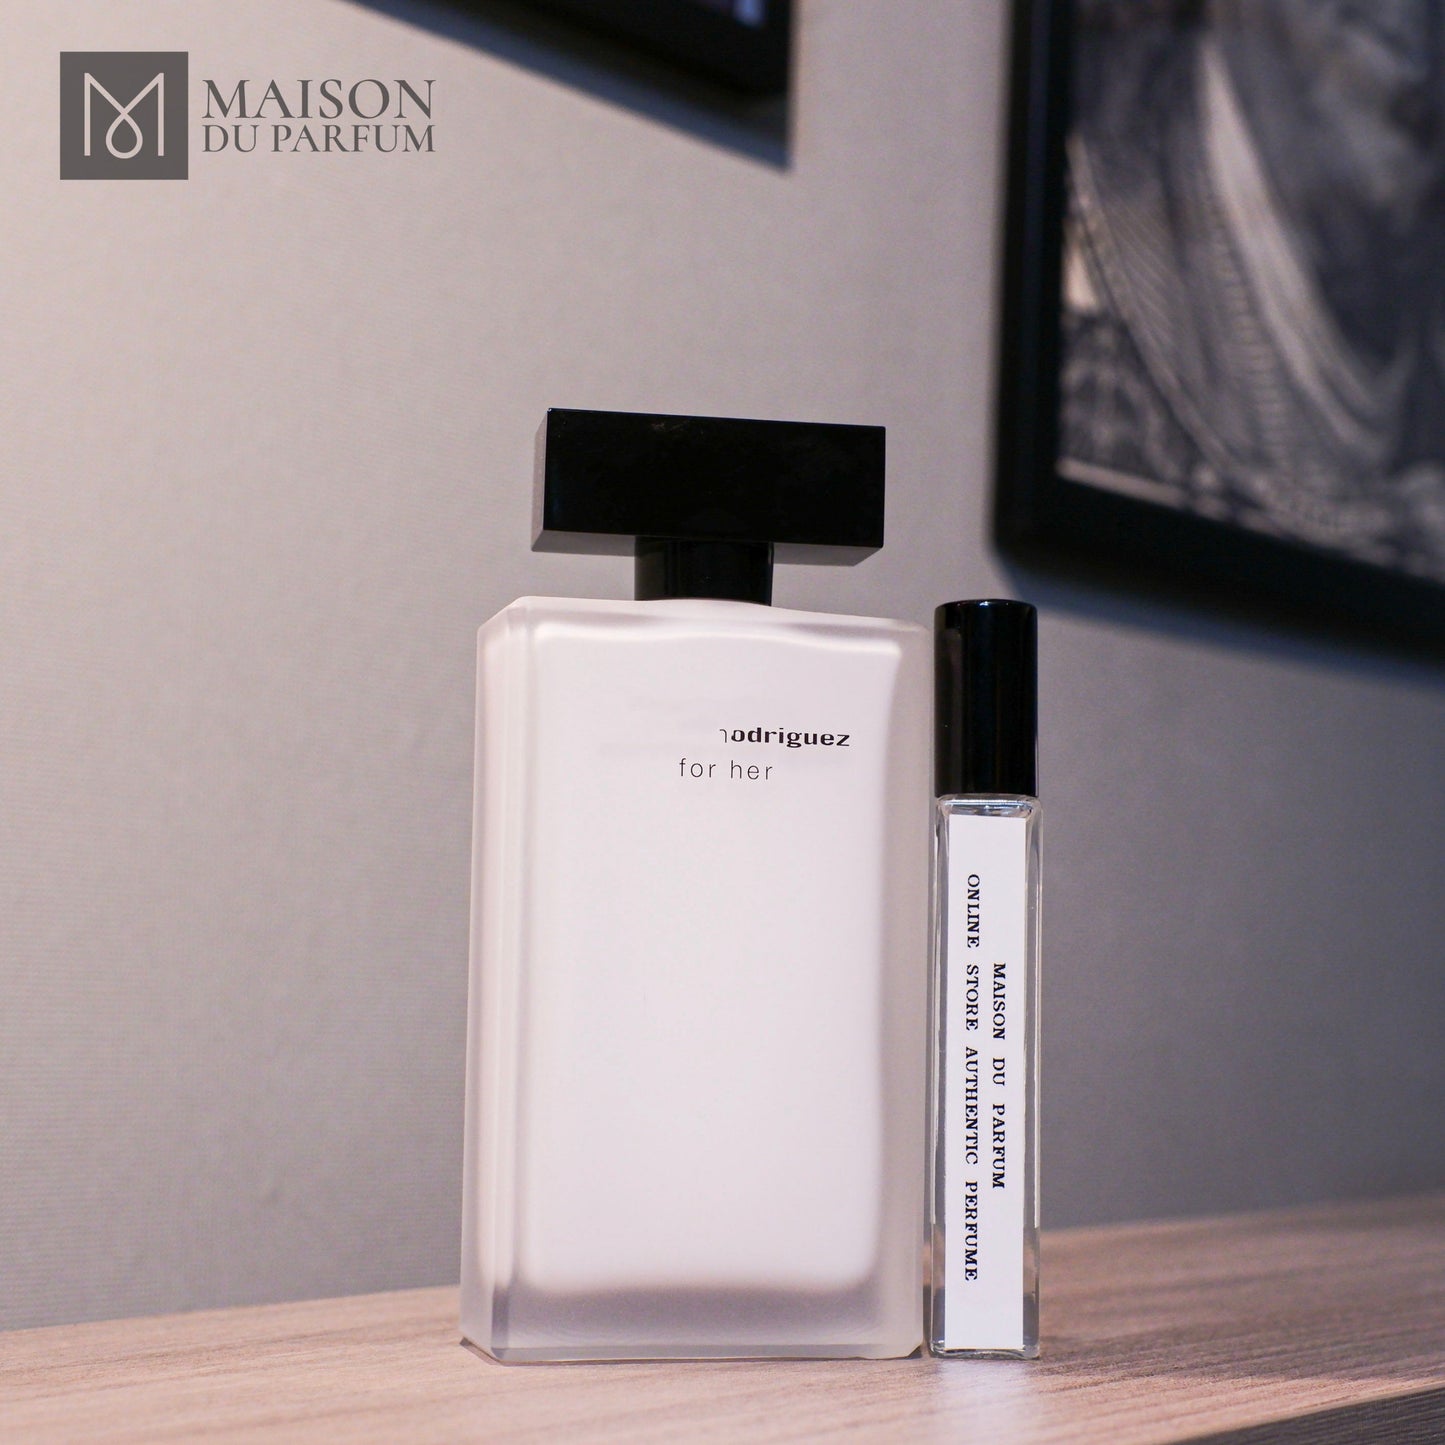 NARCISO RODRIGUEZ FOR HER PURE MUSC